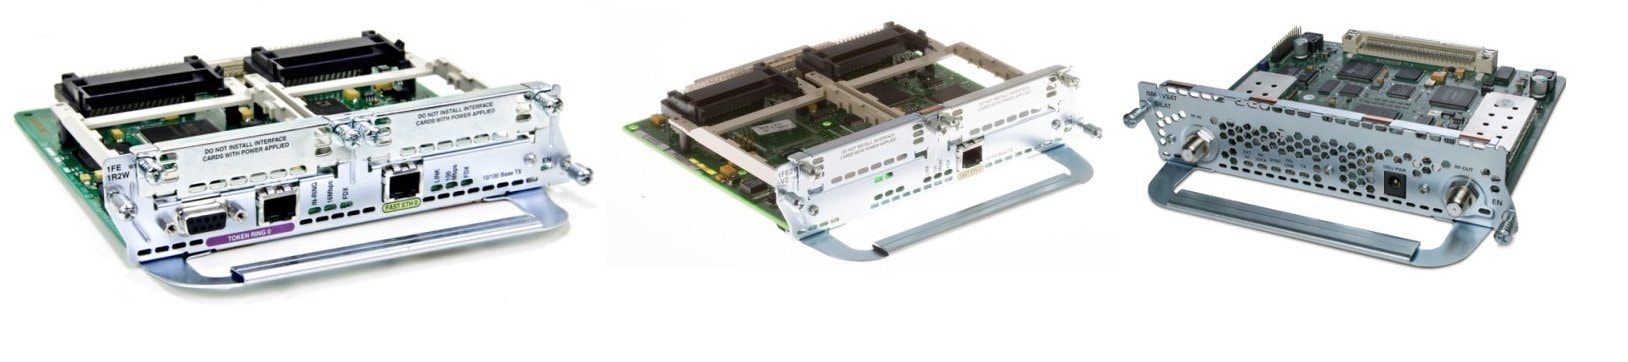 Product image of Cisco Network Modules